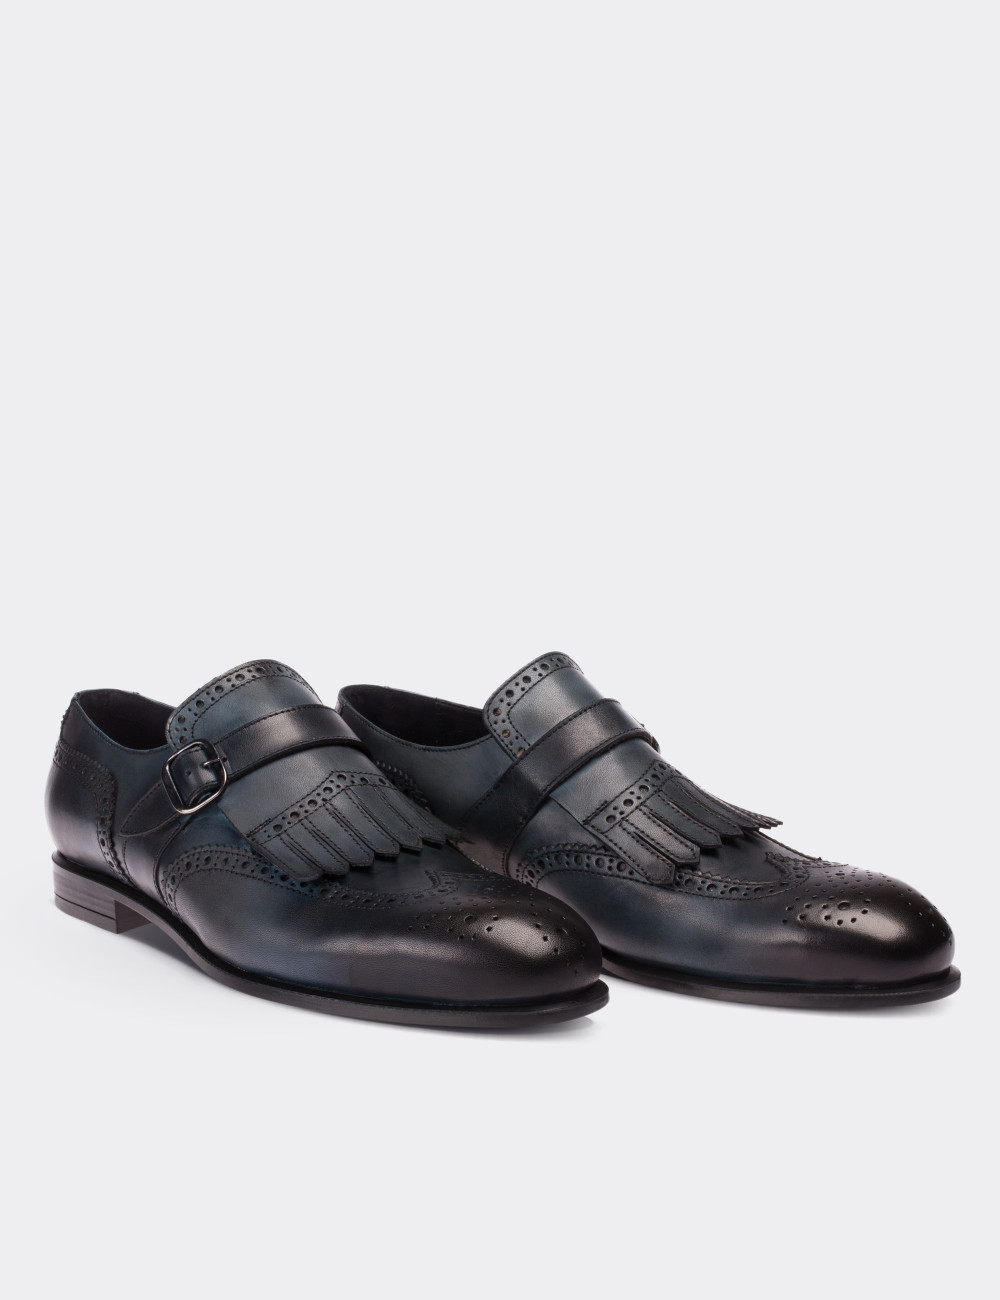 Navy  Leather Monk Straps Shoes - 01680MLCVC02